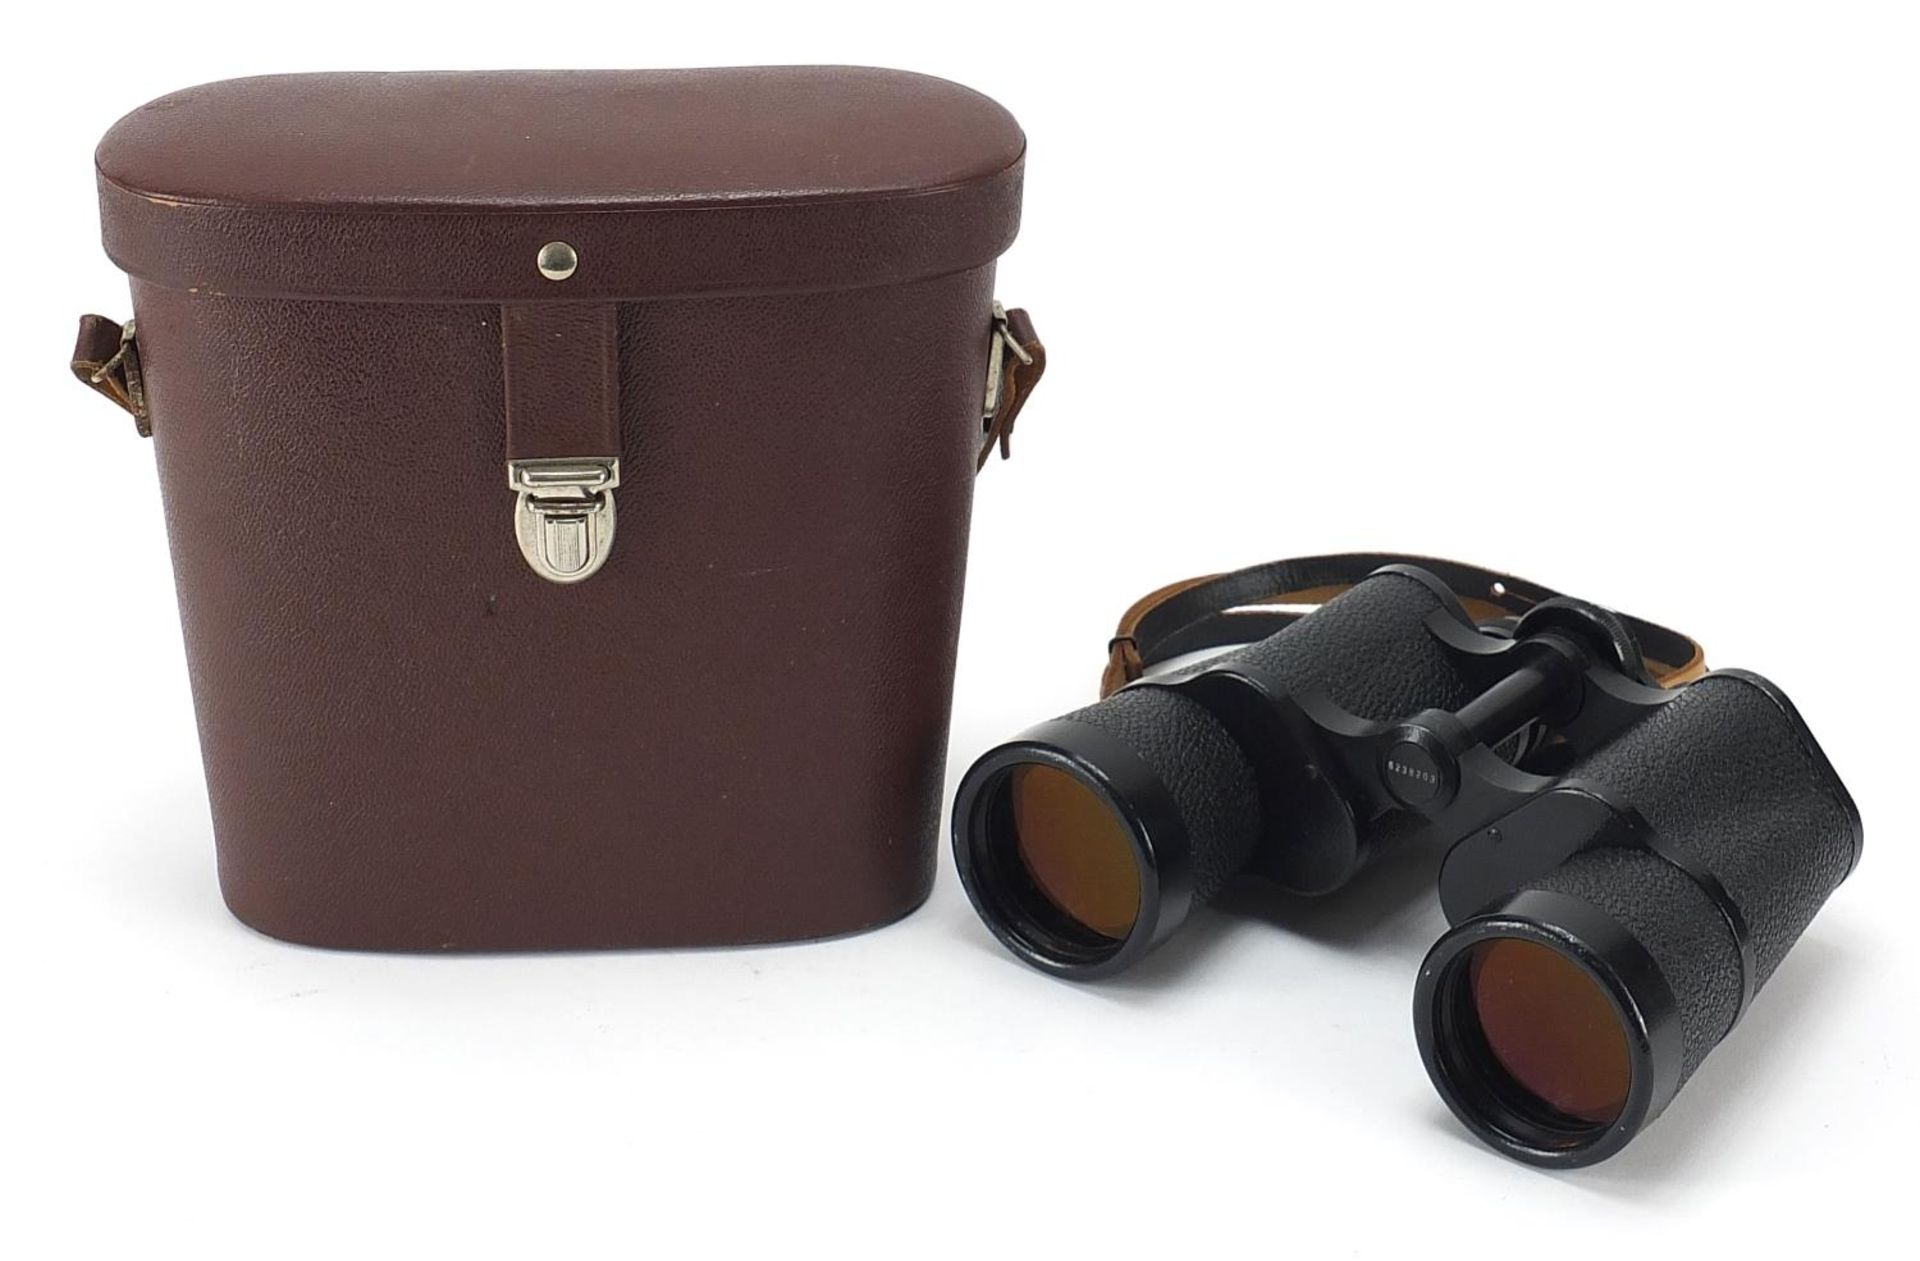 Pair of Carl Zeiss Jena 10 x 50 binoculars with brown leather case